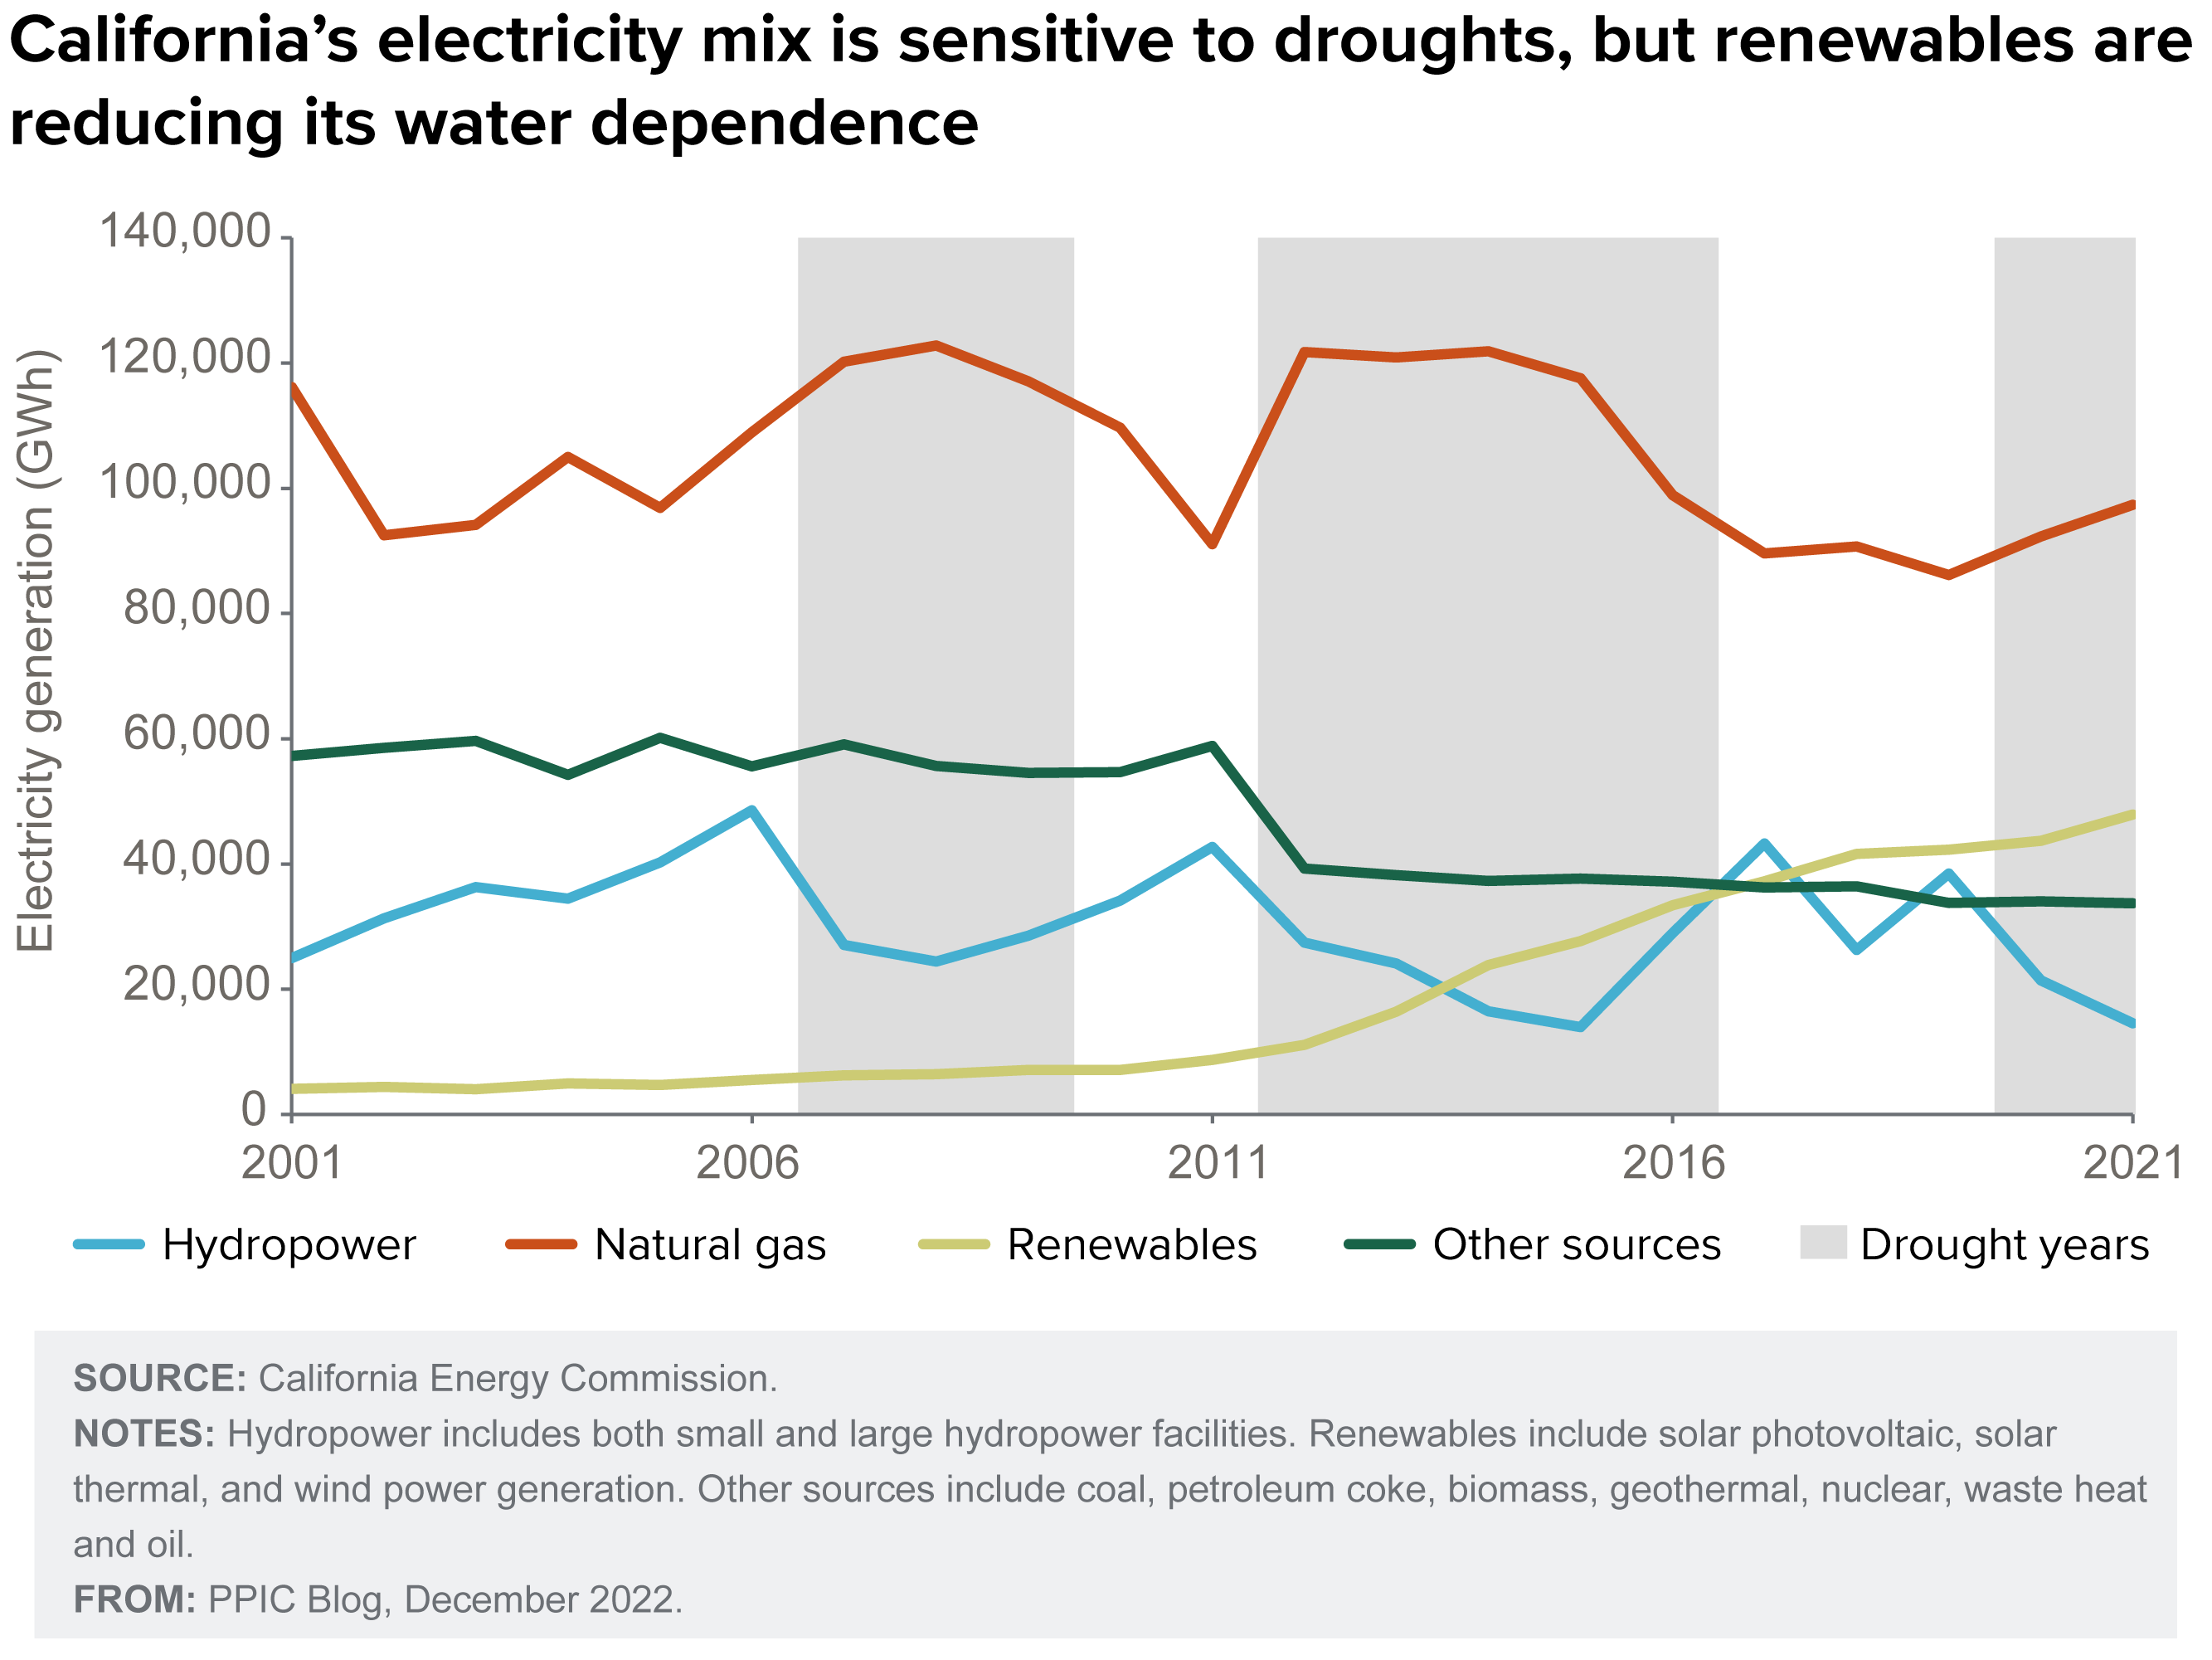 figure - California’s electricity mix is sensitive to droughts, but renewables are reducing its water dependence